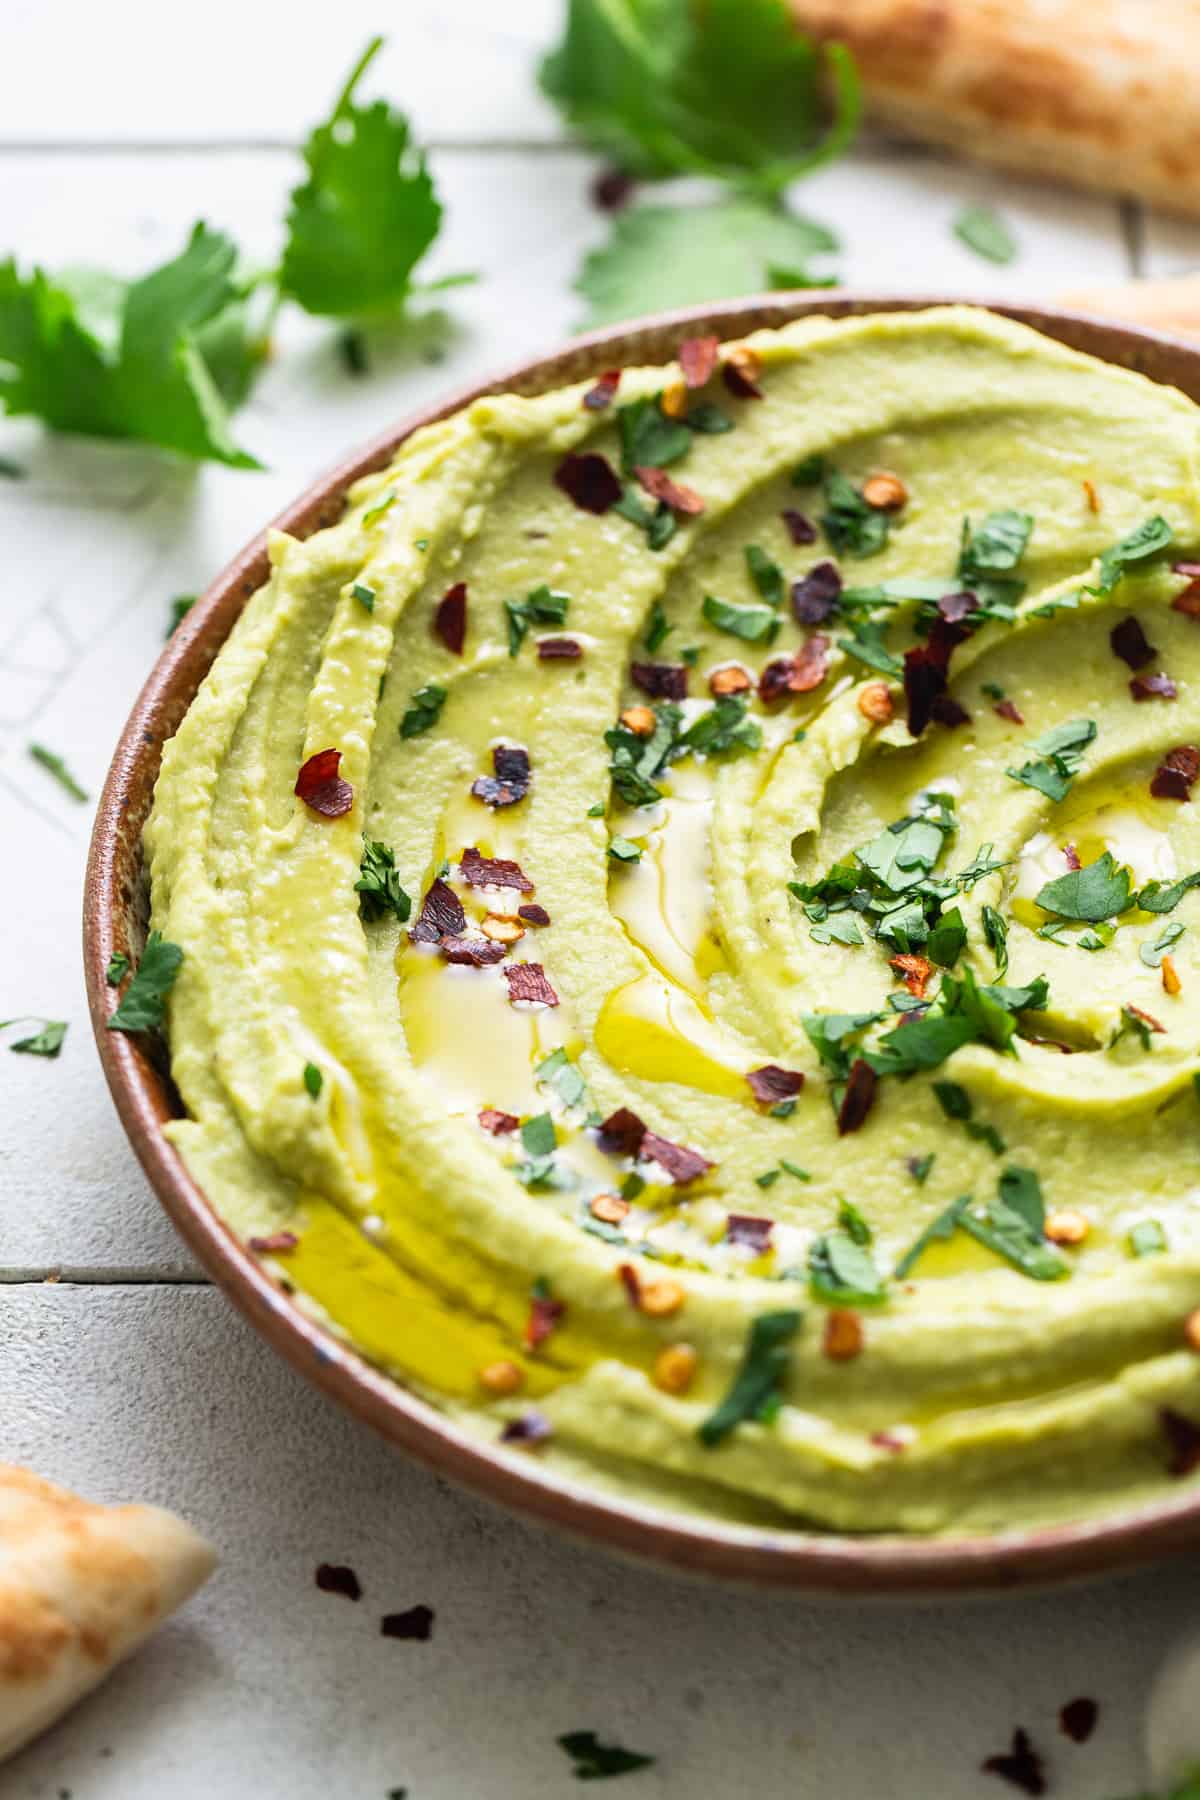 Avocado hummus garnished with a drizzle of olive oil, chopped cilantro, and red pepper flakes.